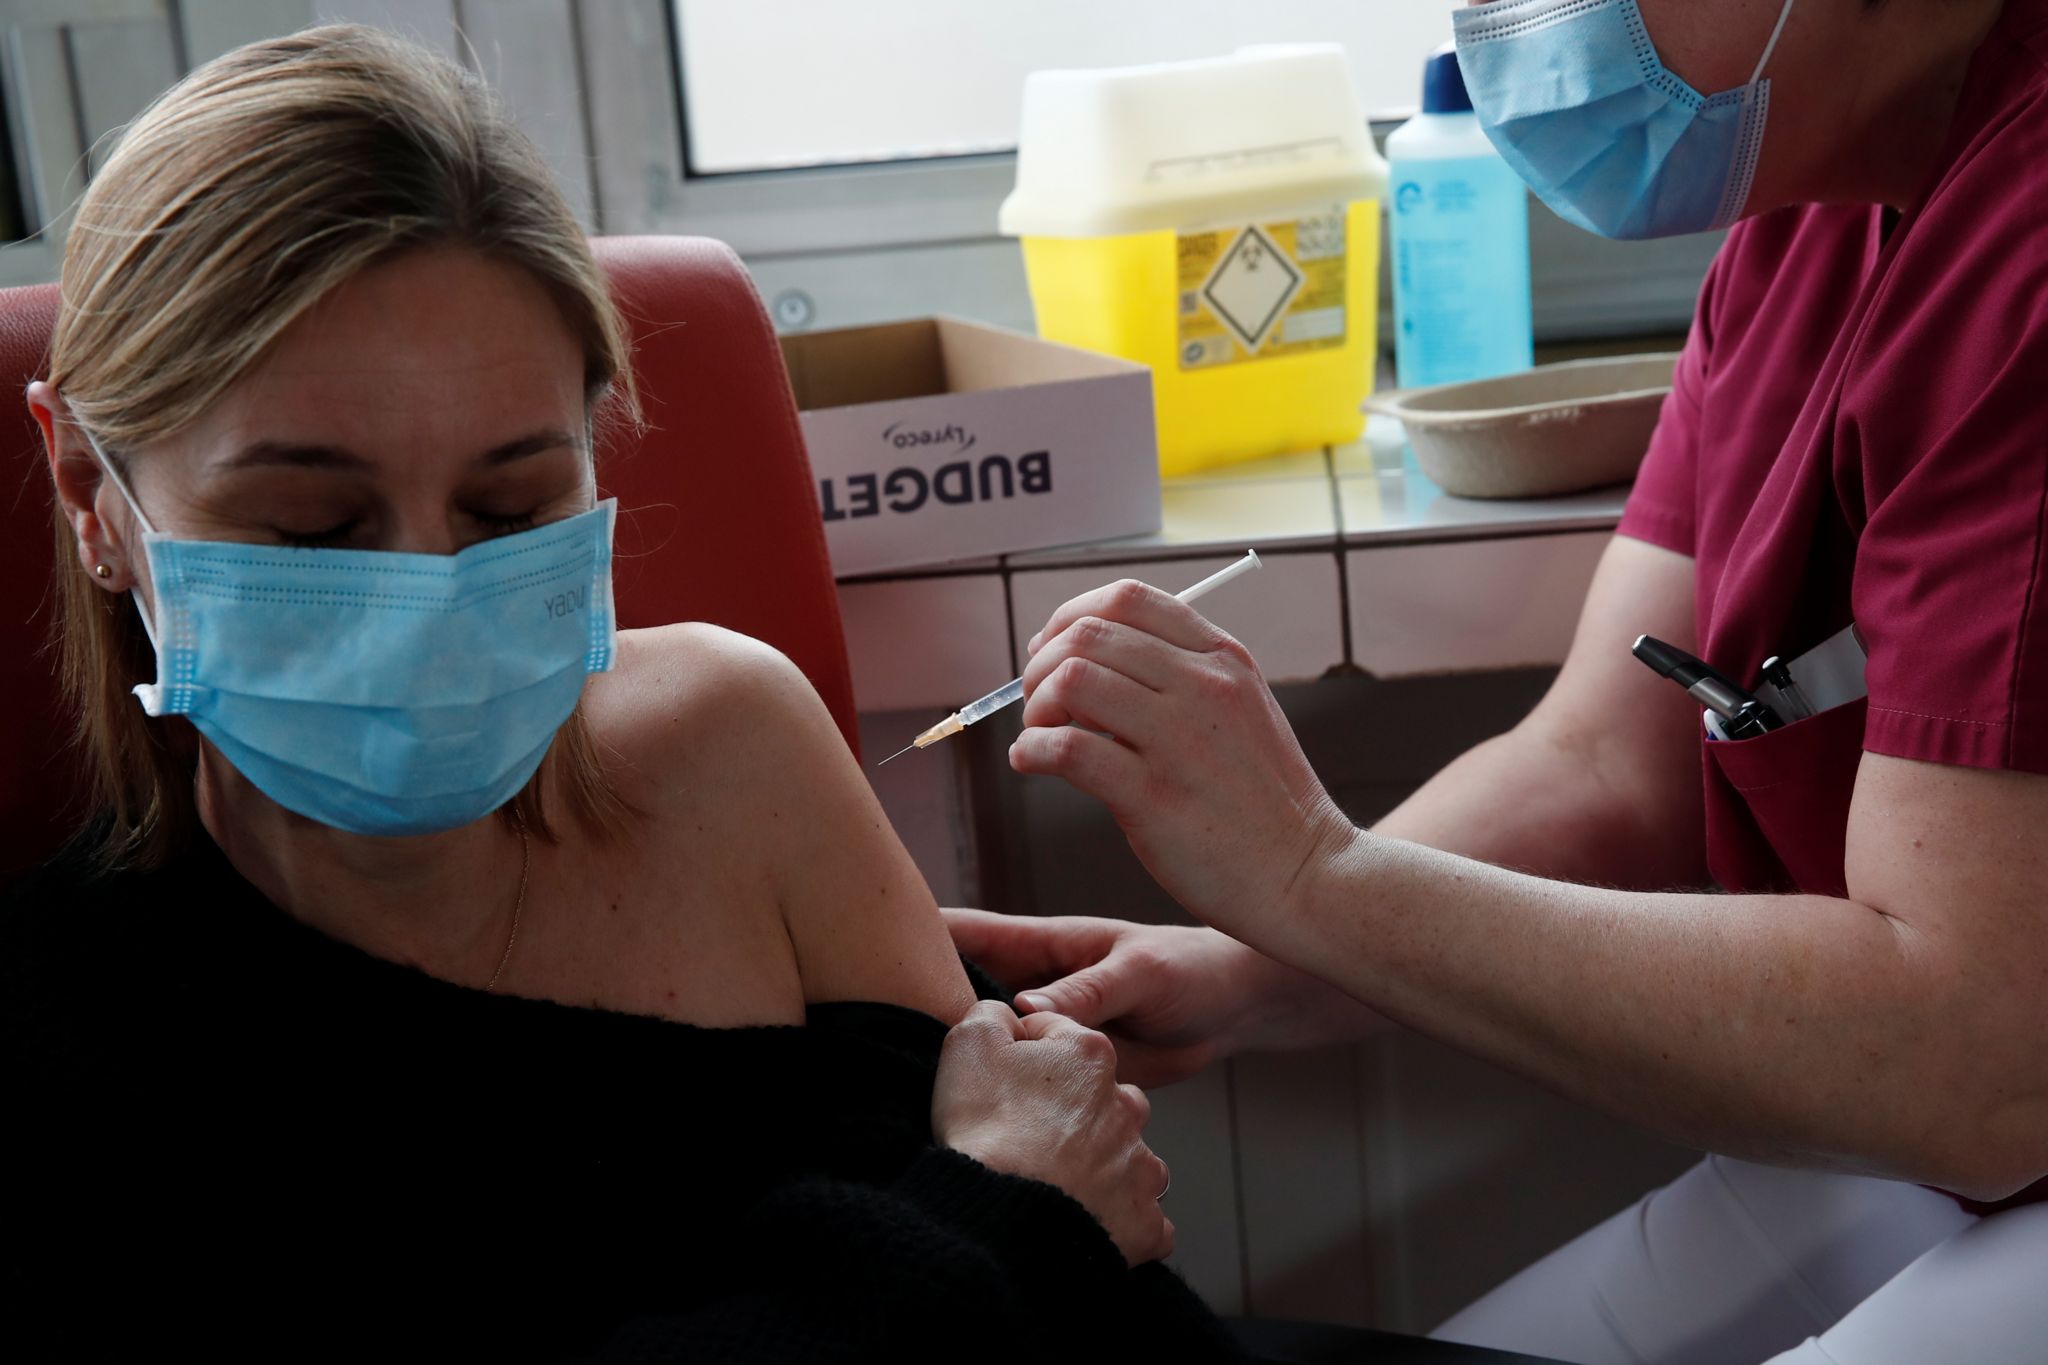 A woman is vaccinated against Covid-19 in Paris, France